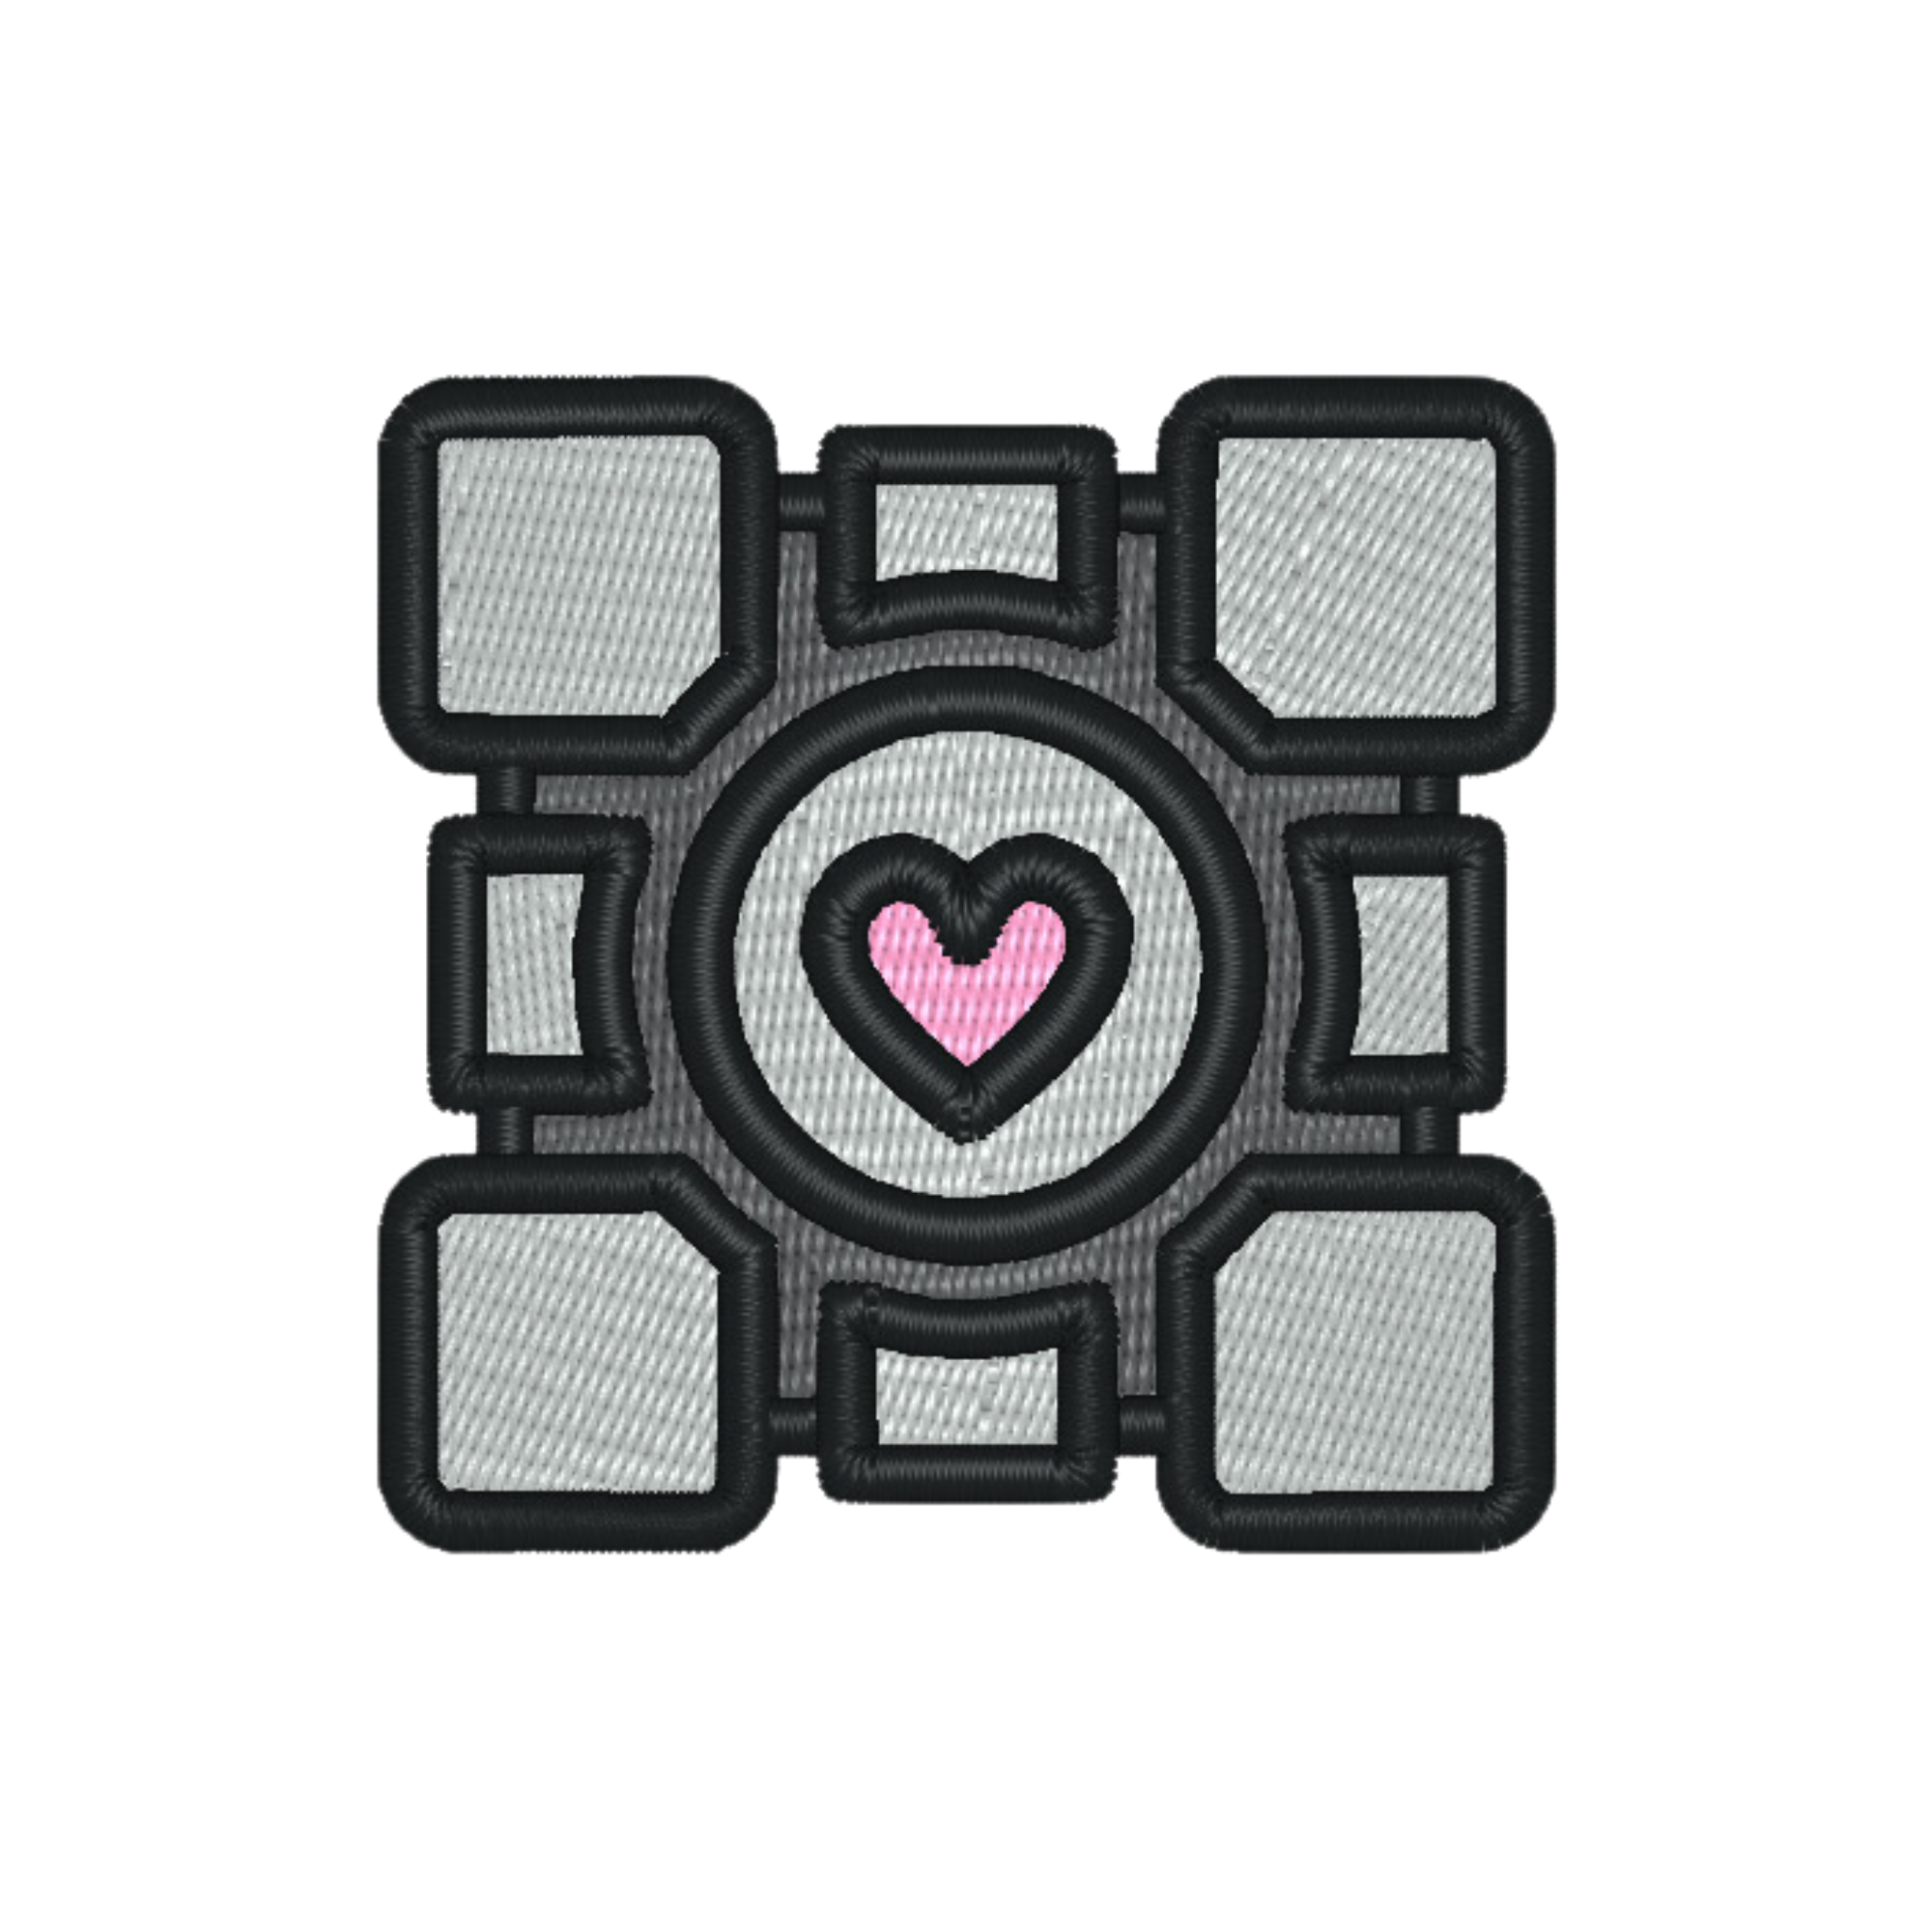 Companion Cube Portal Embroidered Iron-on Patch